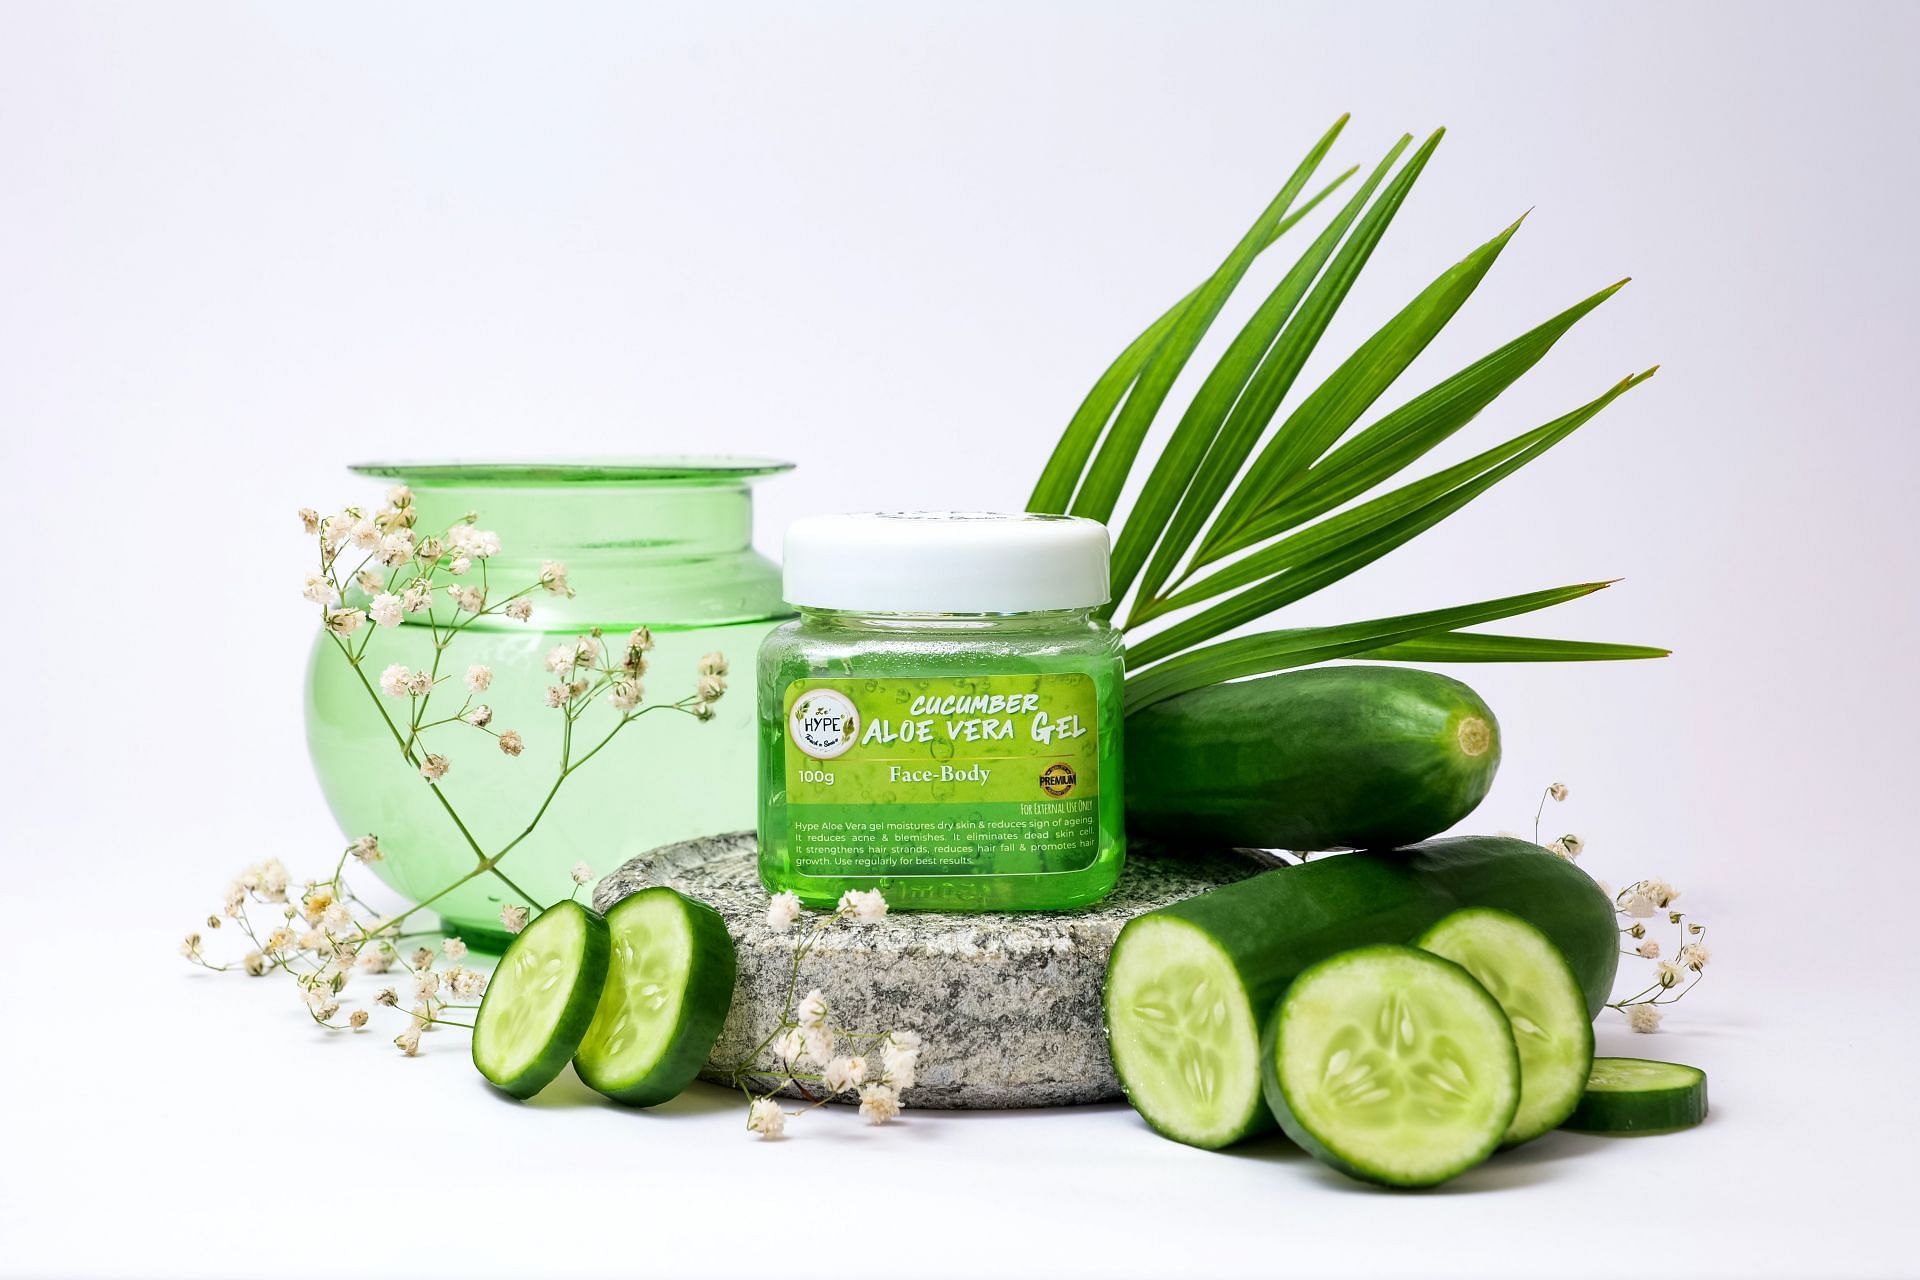 Aloe vera: One of the effective methods to remove blackheads at home (Image via Pexels)